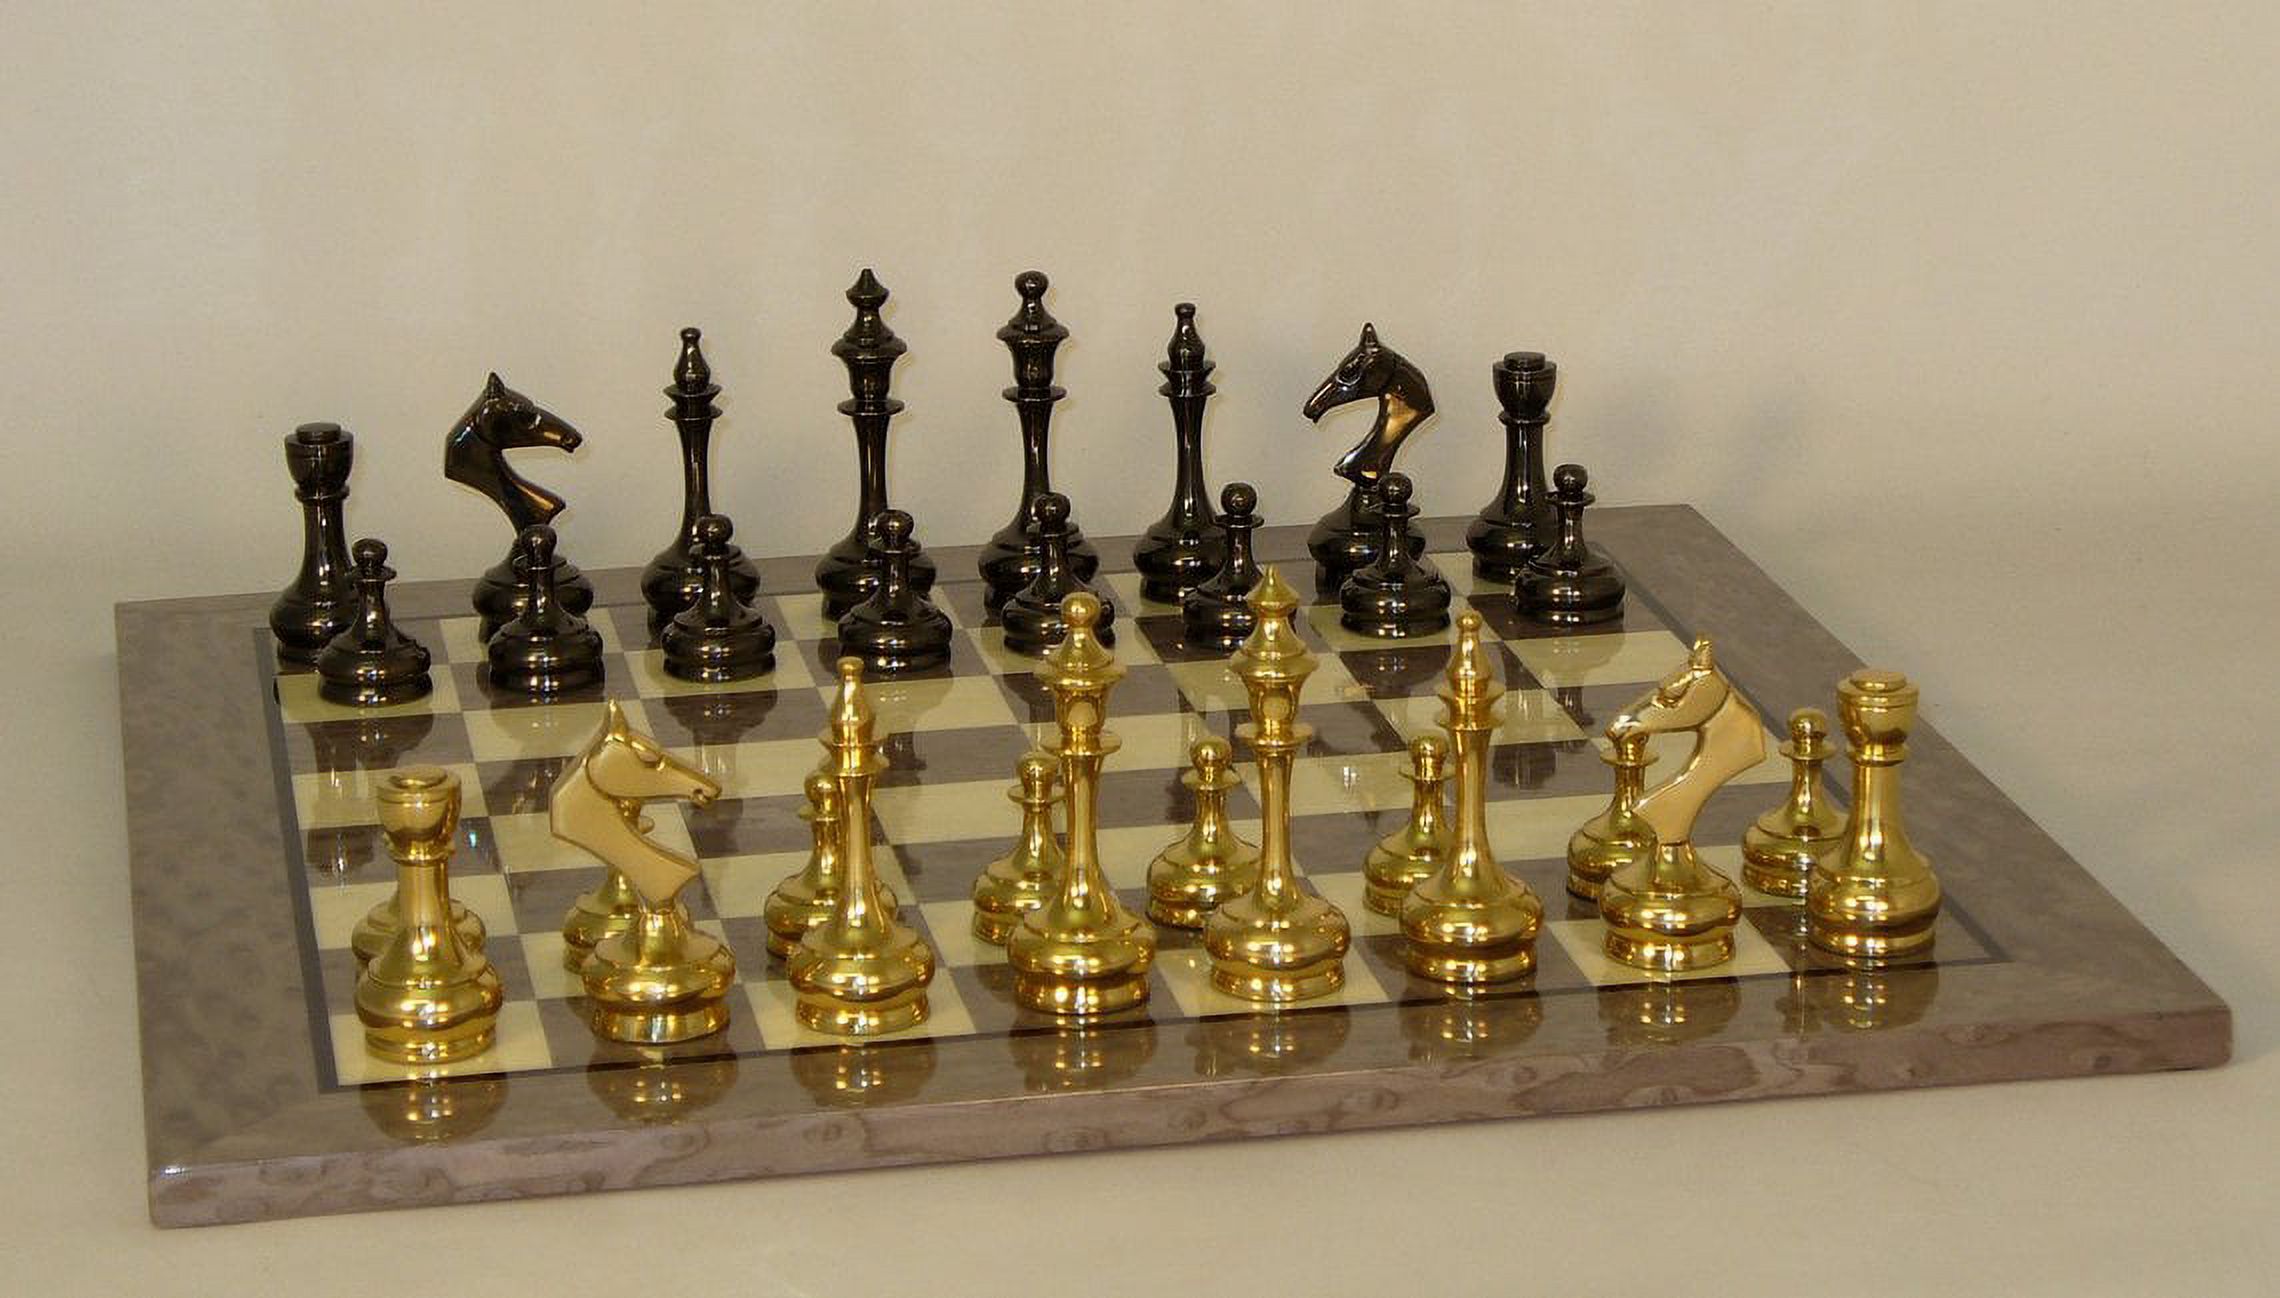 3.75" Slim Solid Brass on Grey Briarwood Chess Board - image 1 of 2